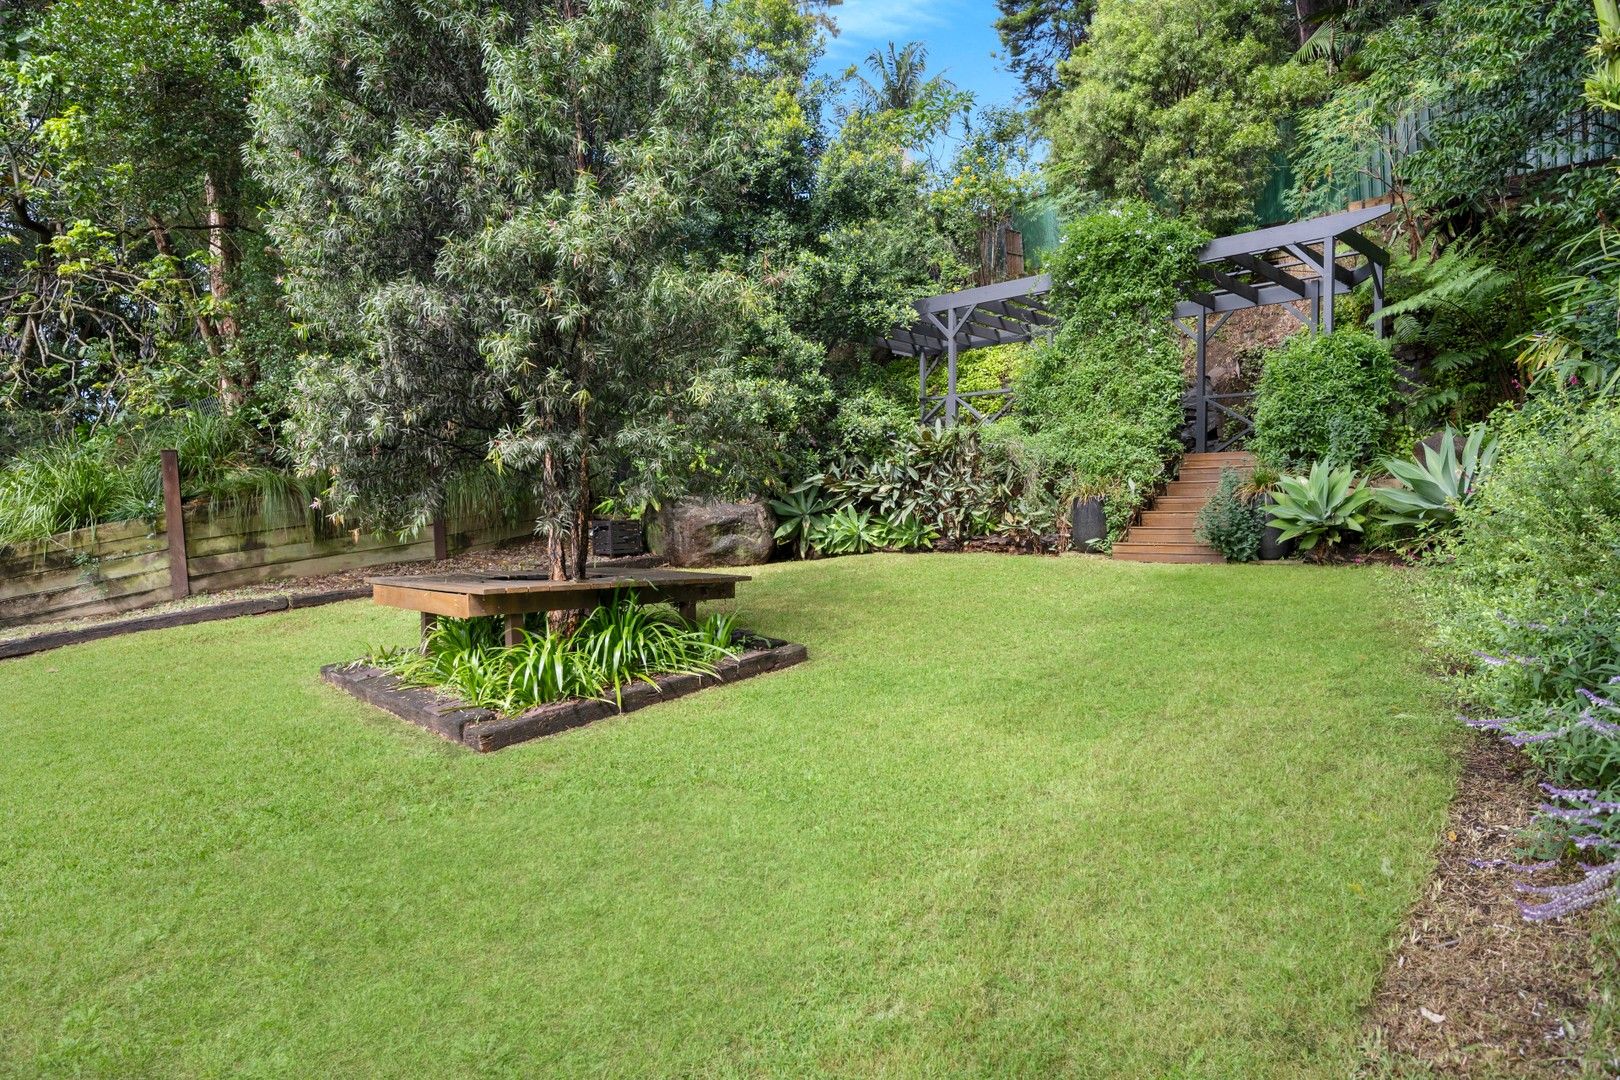 44-46 Risley Road, Figtree NSW 2525, Image 0